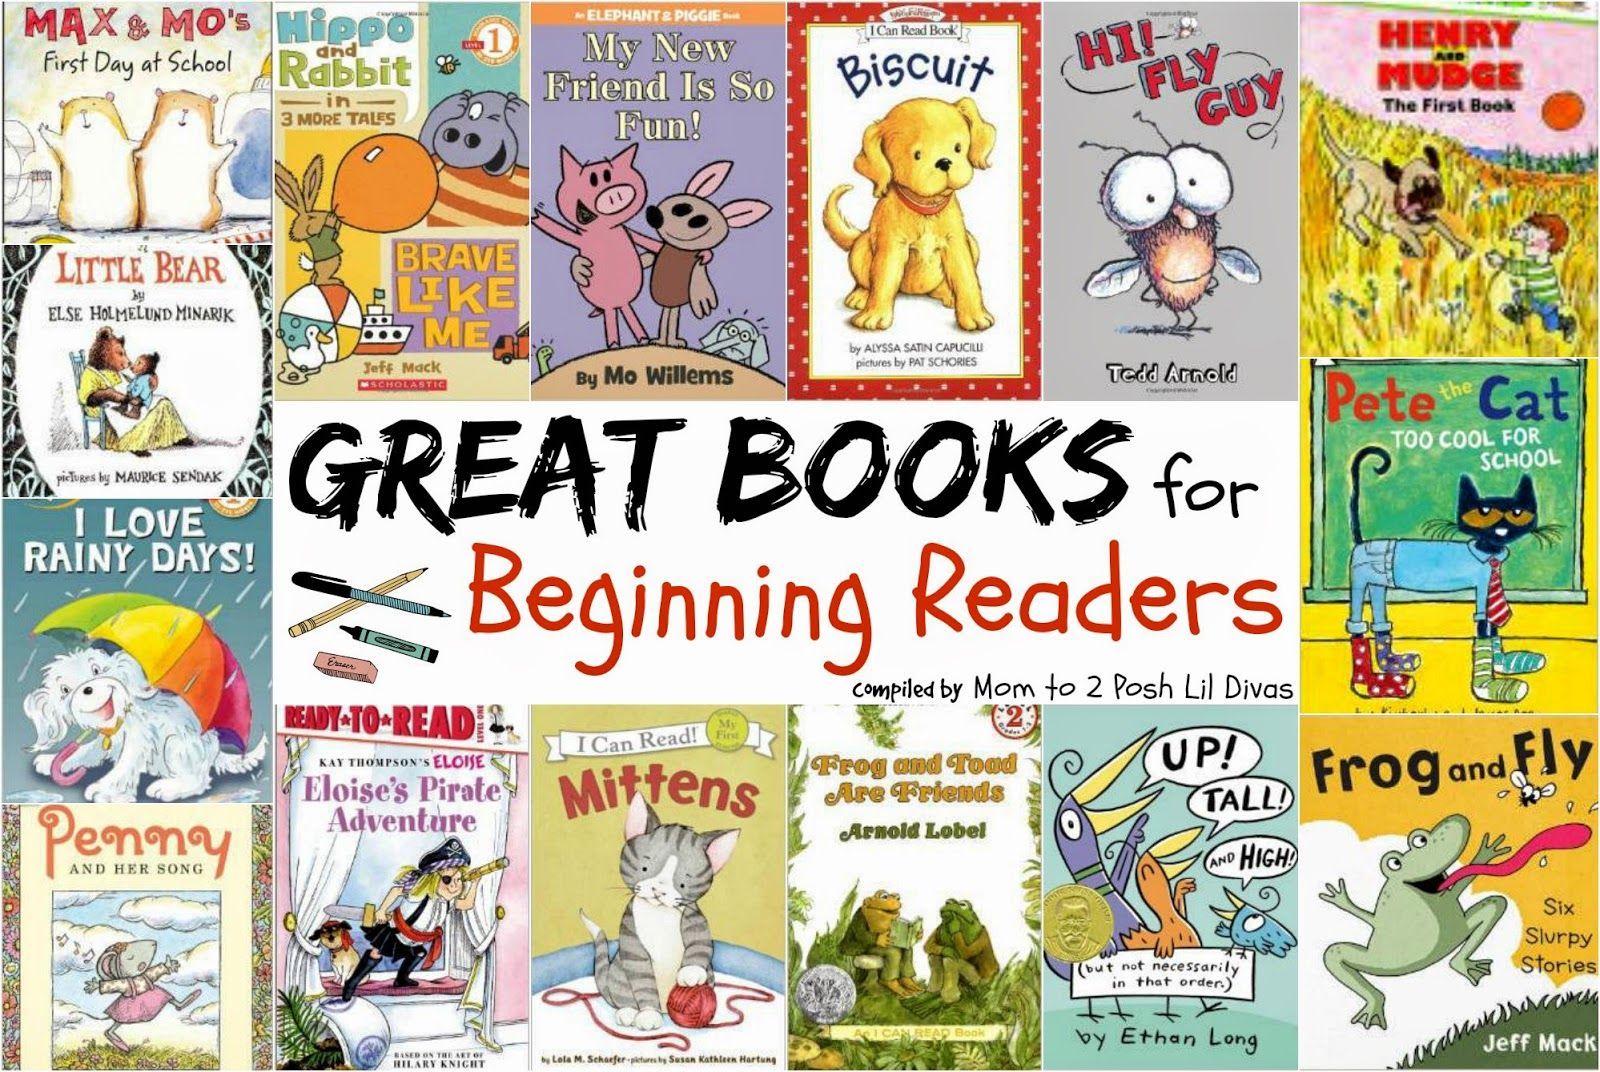 books for beginning readers – simple text to help them gain confidence and engaging characters & stories to keep them reading.